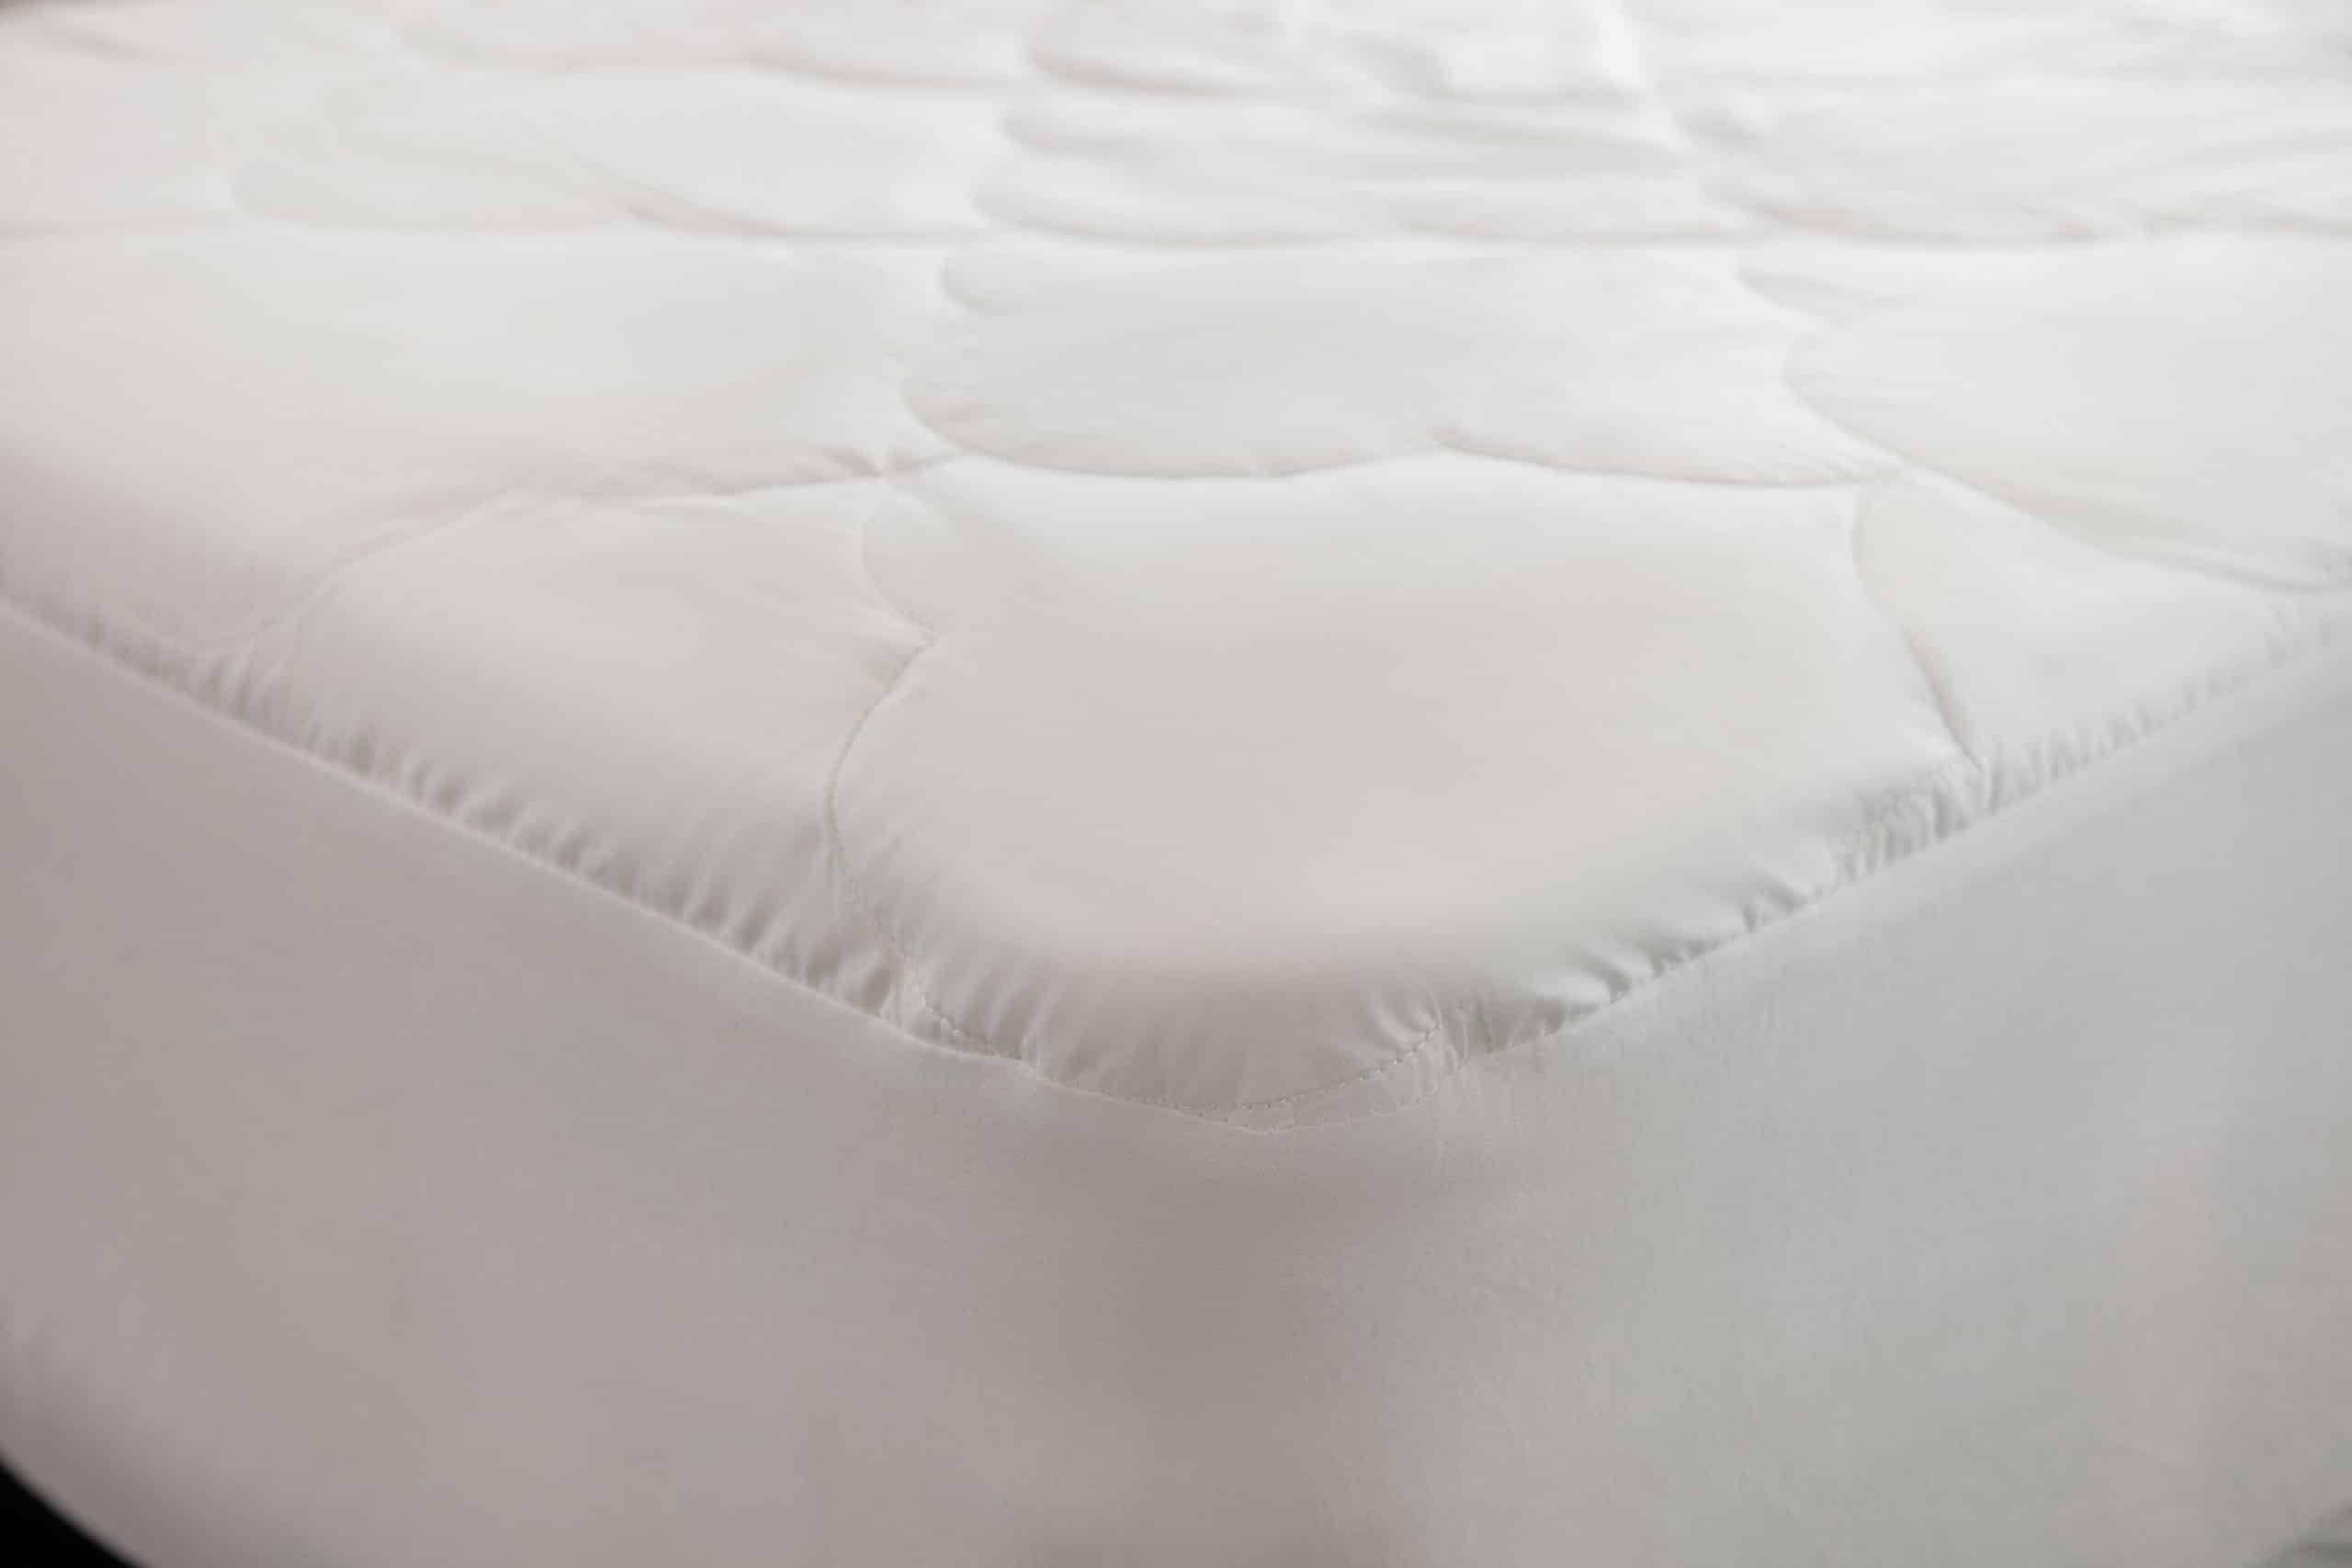 Bambi Ecorenew quilted mattress protector on Latex Mattress Australia 100 natural latex mattress resized